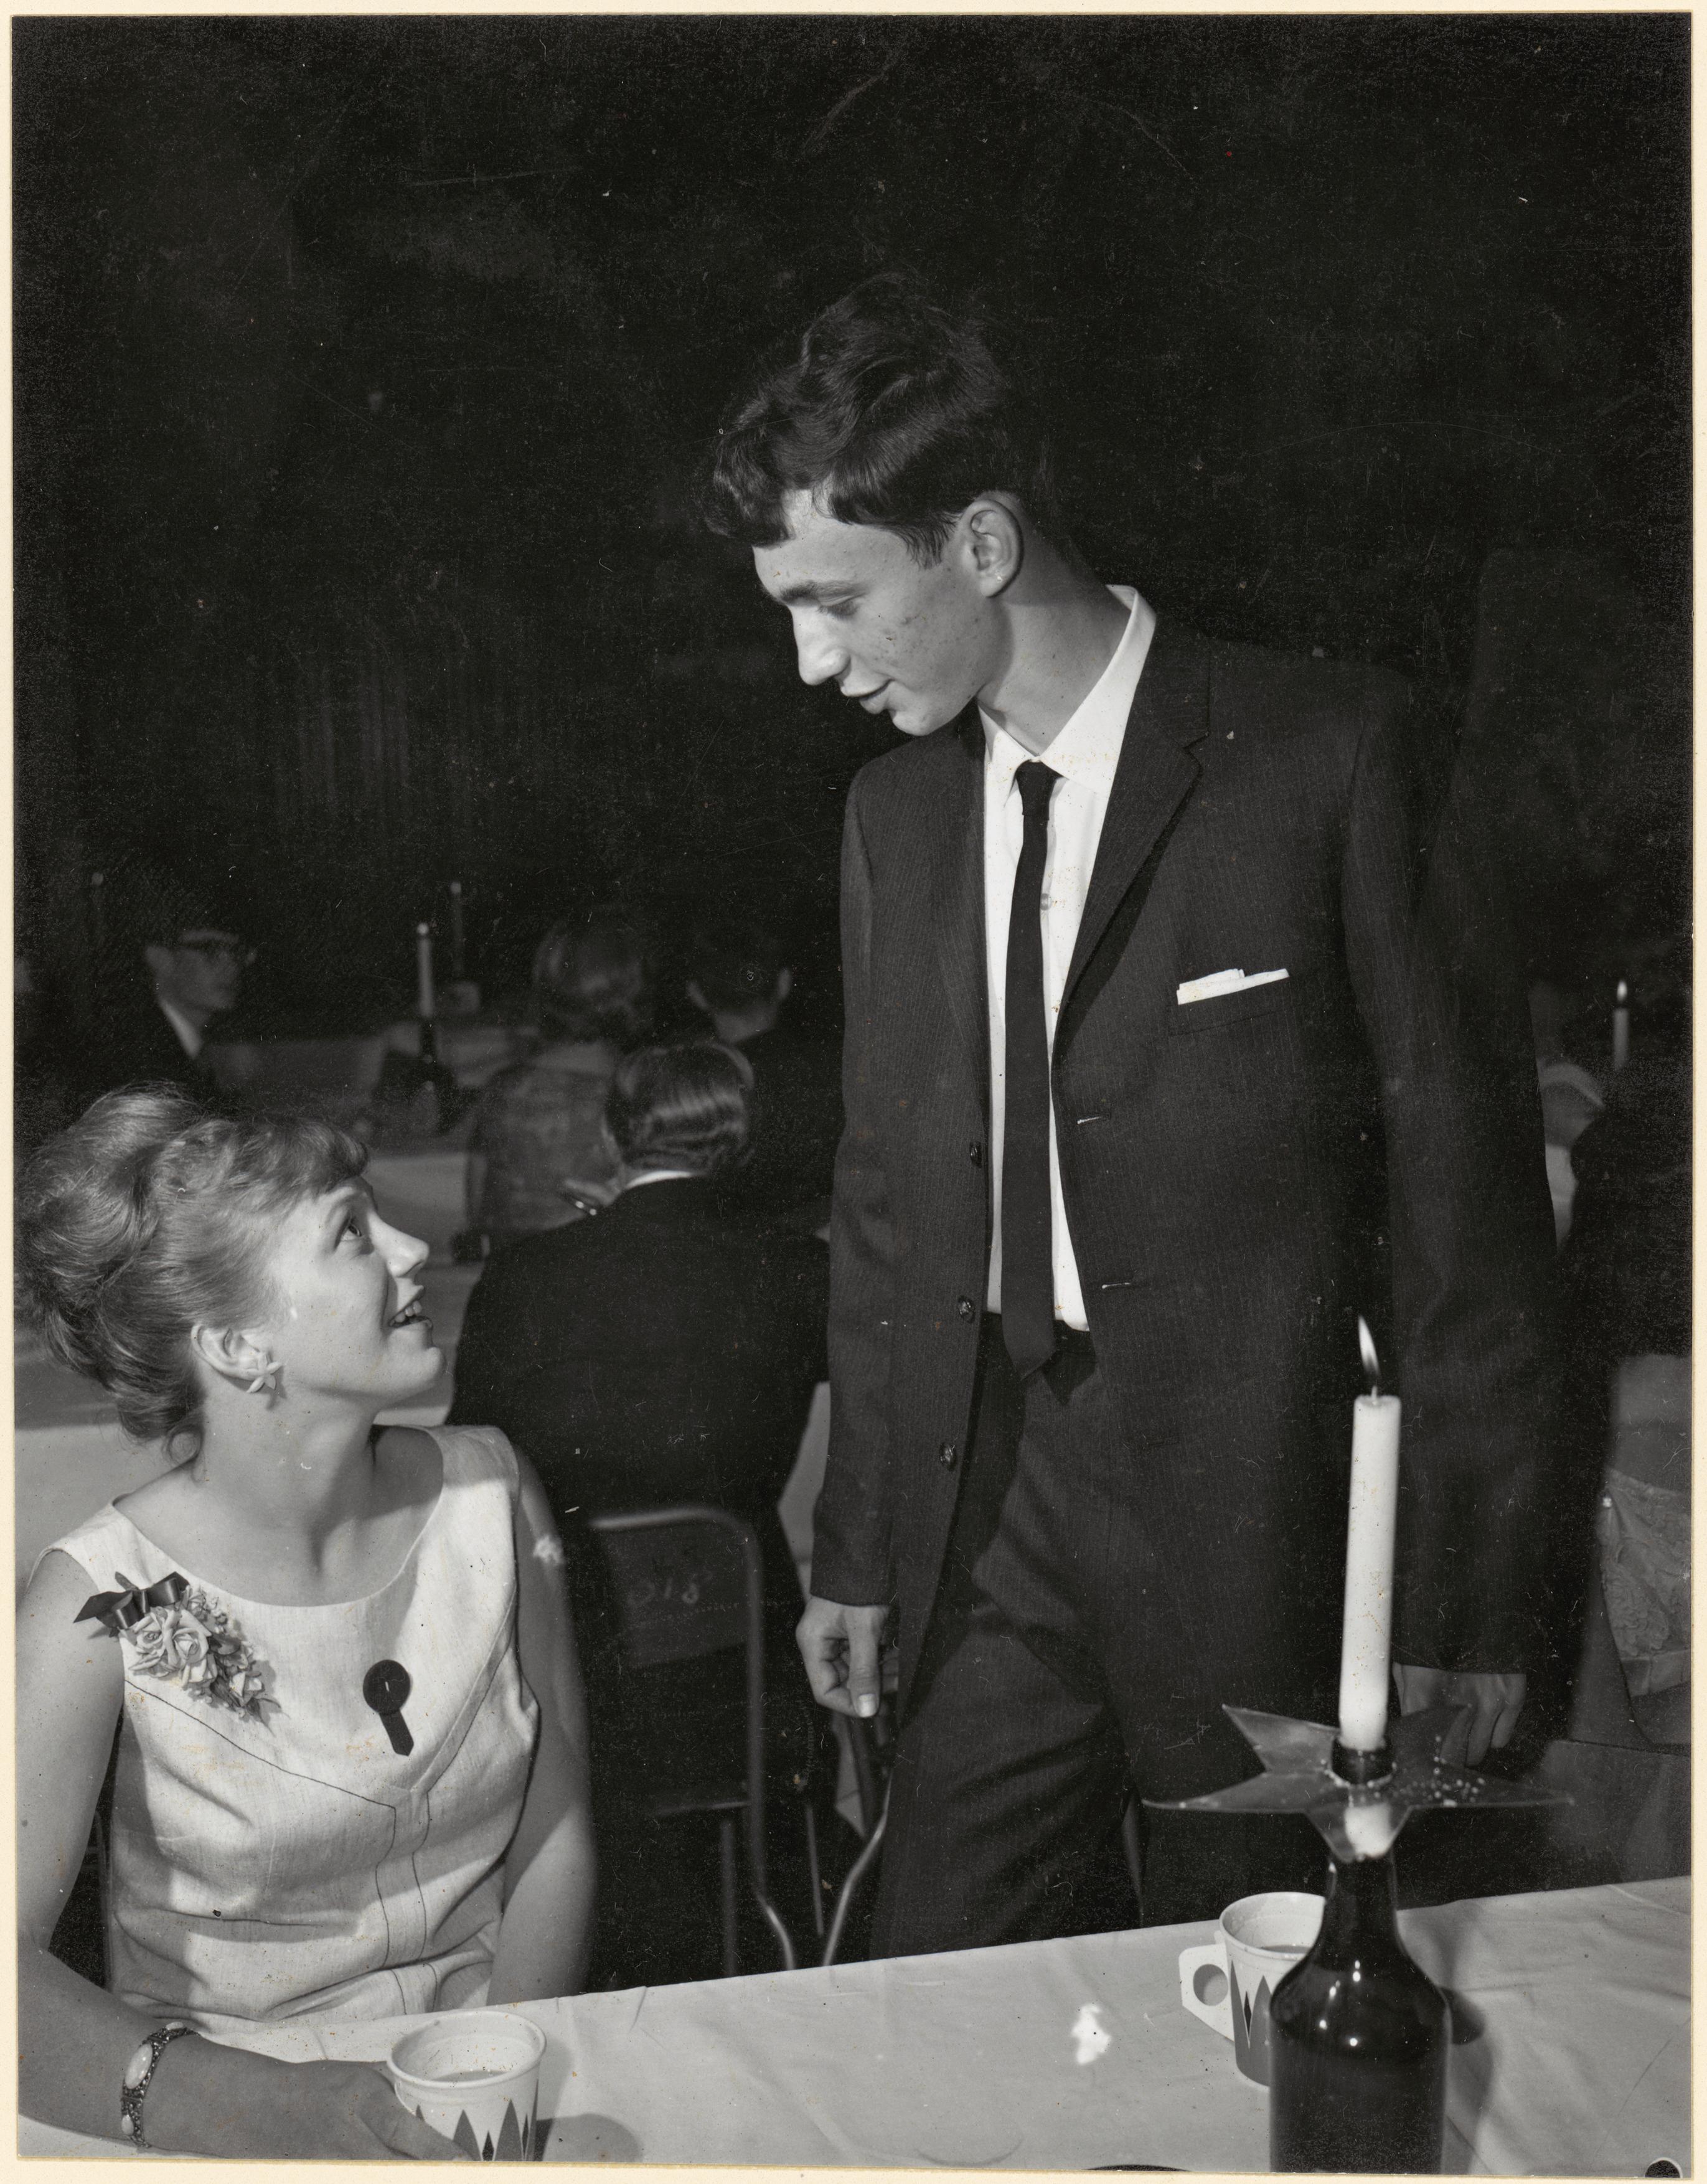 Well behaved adolescents performing acceptable gendered social rituals at a school dance, Canberra, 1964. National Library of Australia, vn4590171